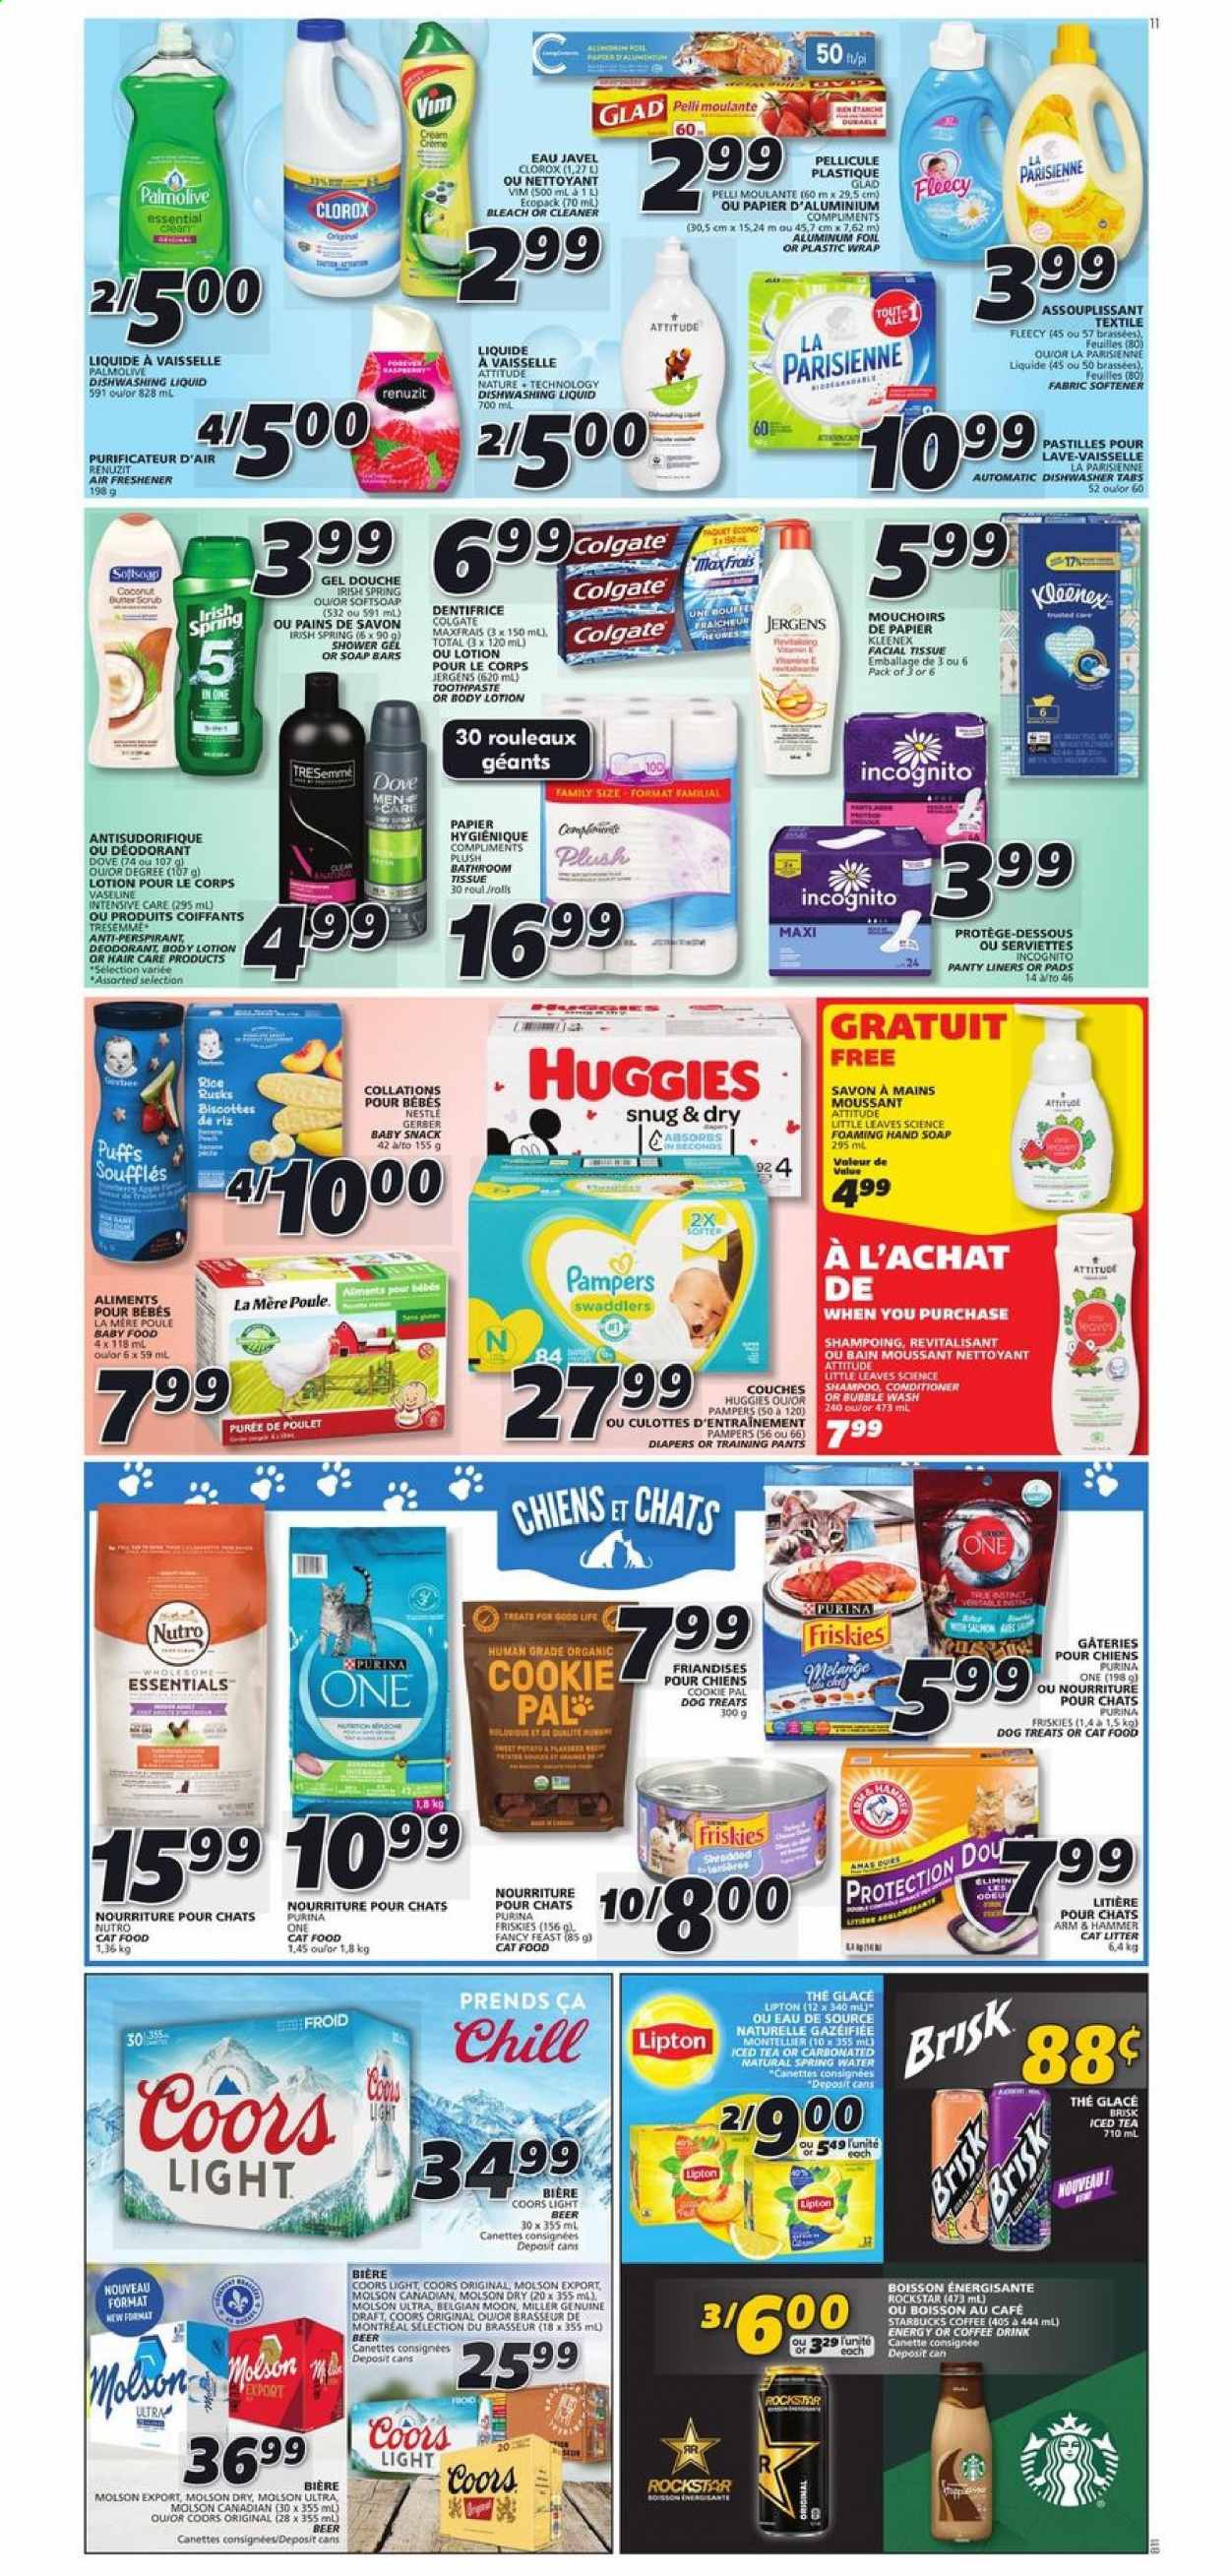 IGA flyer  - July 29, 2021 - August 04, 2021.